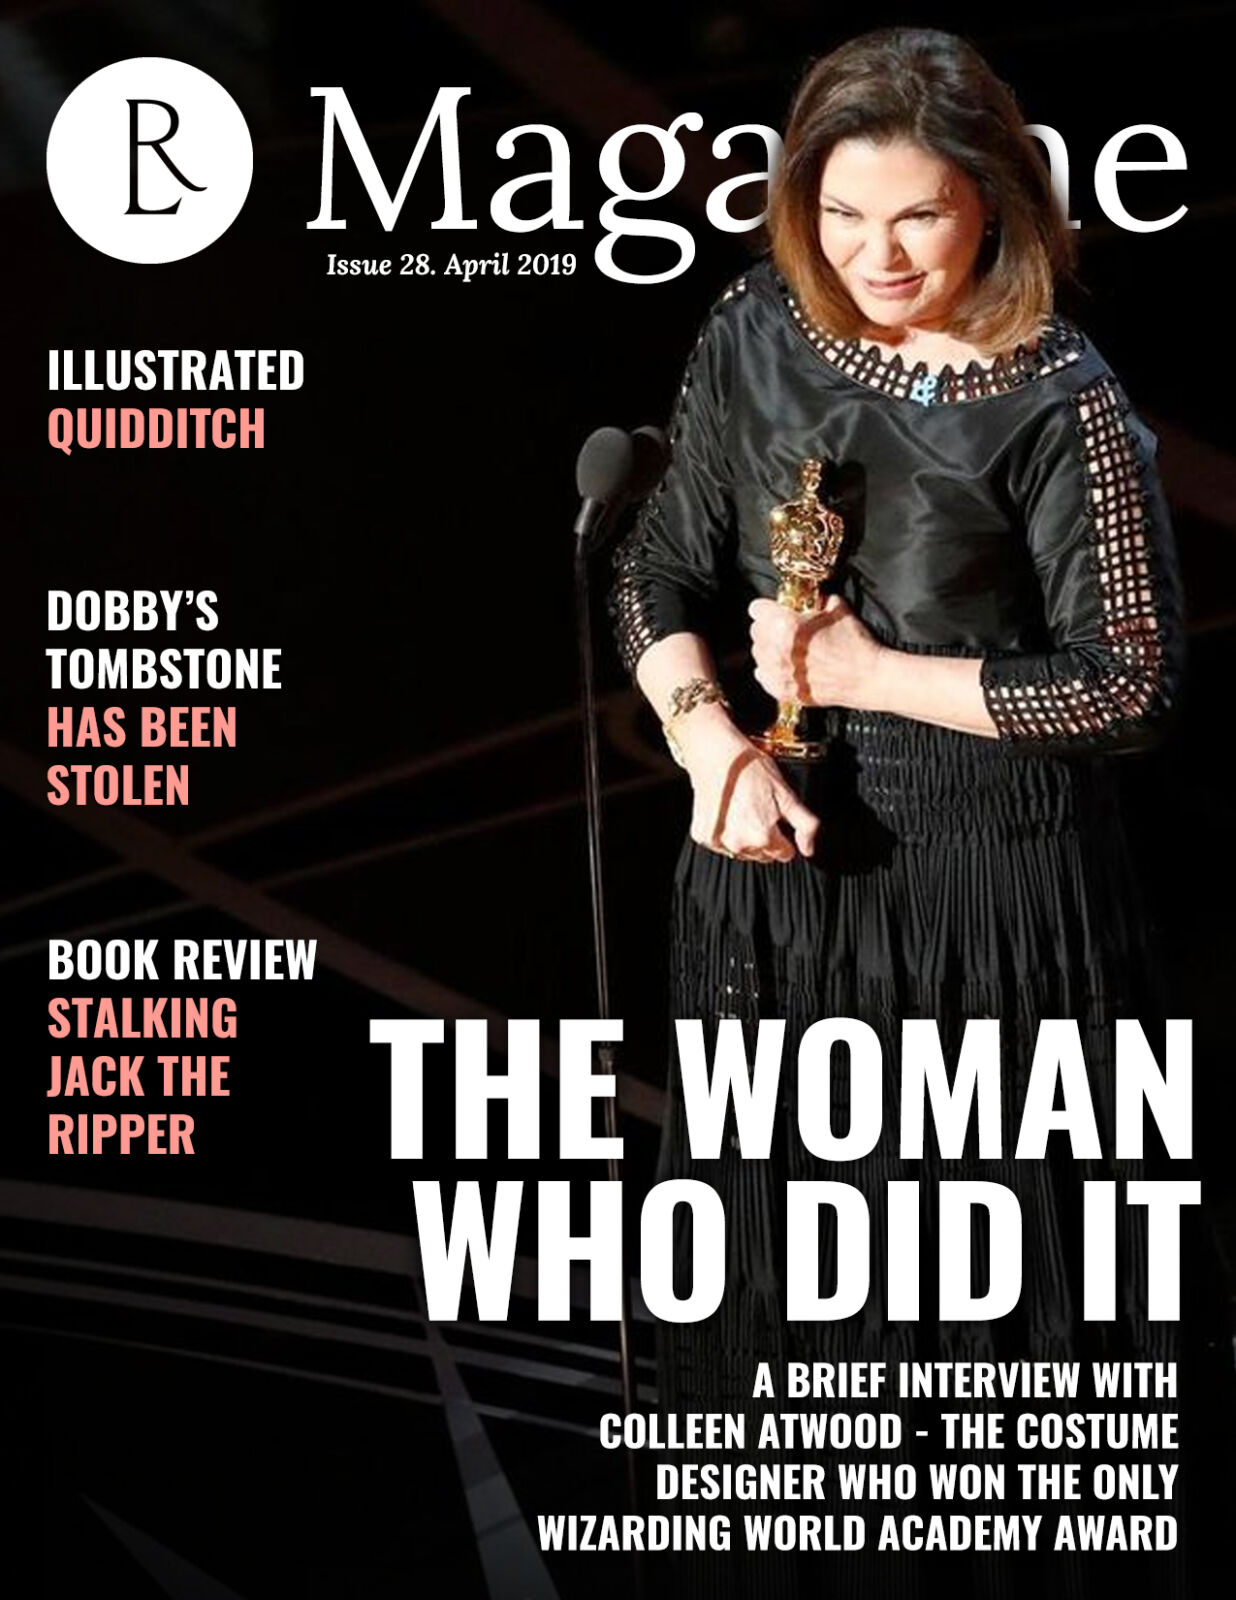 The Rowling Library Magazine #28 (April 2019): The Woman who did it